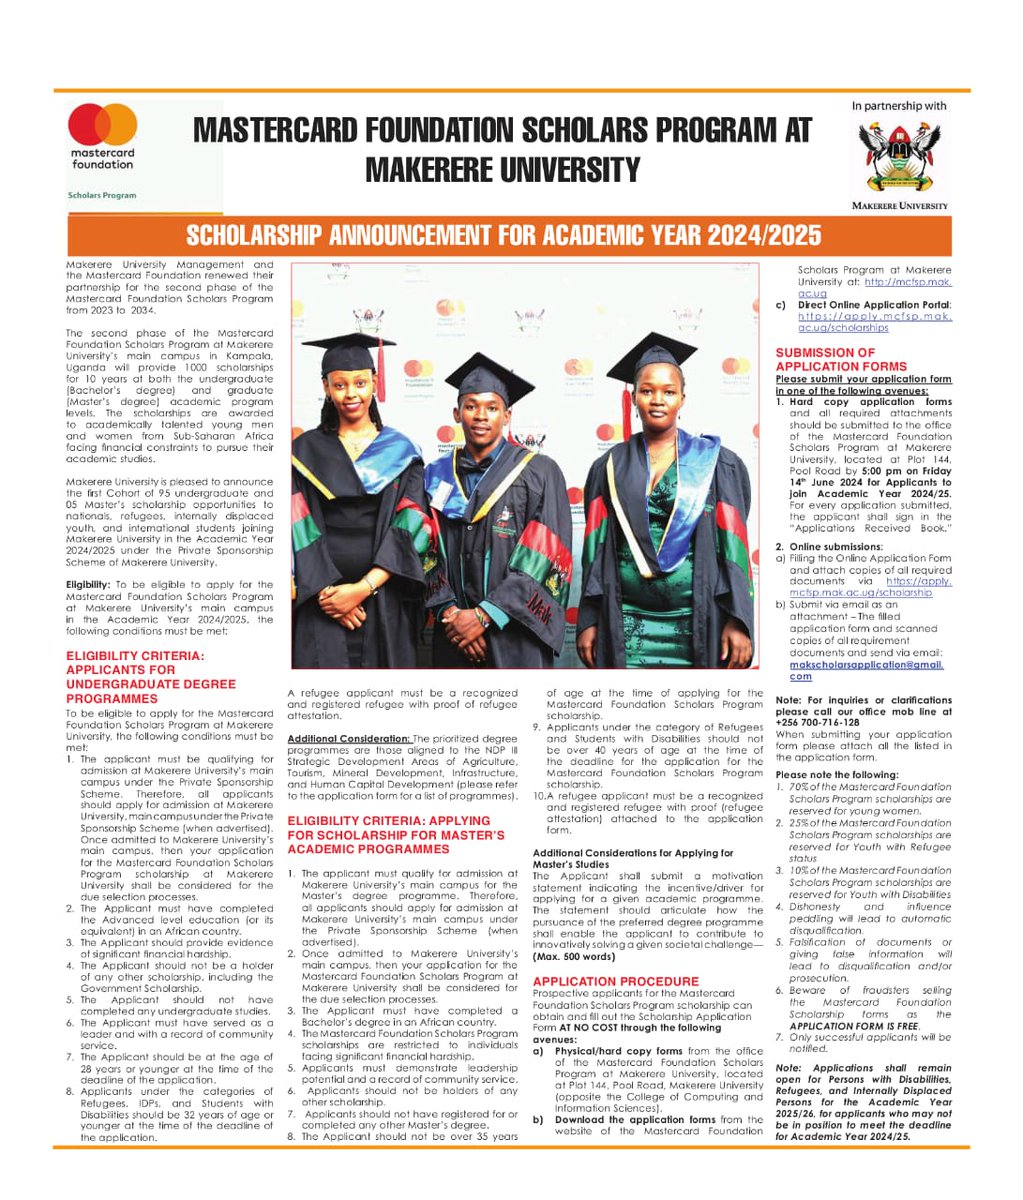 The Mastercard Foundation Scholars Program at Makerere University @MCFMakerere announces Scholarship Opportunities for Academic Year 2024/25. Alert the Youth with Academic Talent but Financially Constrained to consider this opportunity.